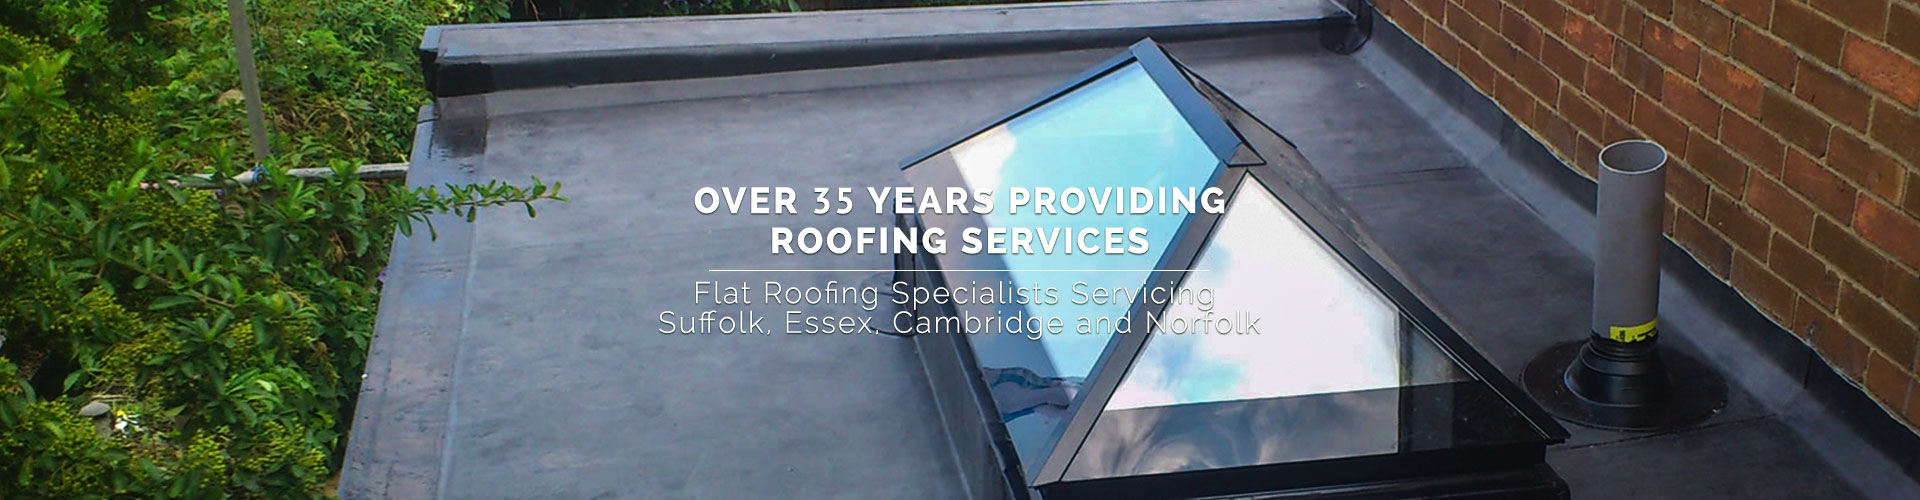 flat roofing company ipswich